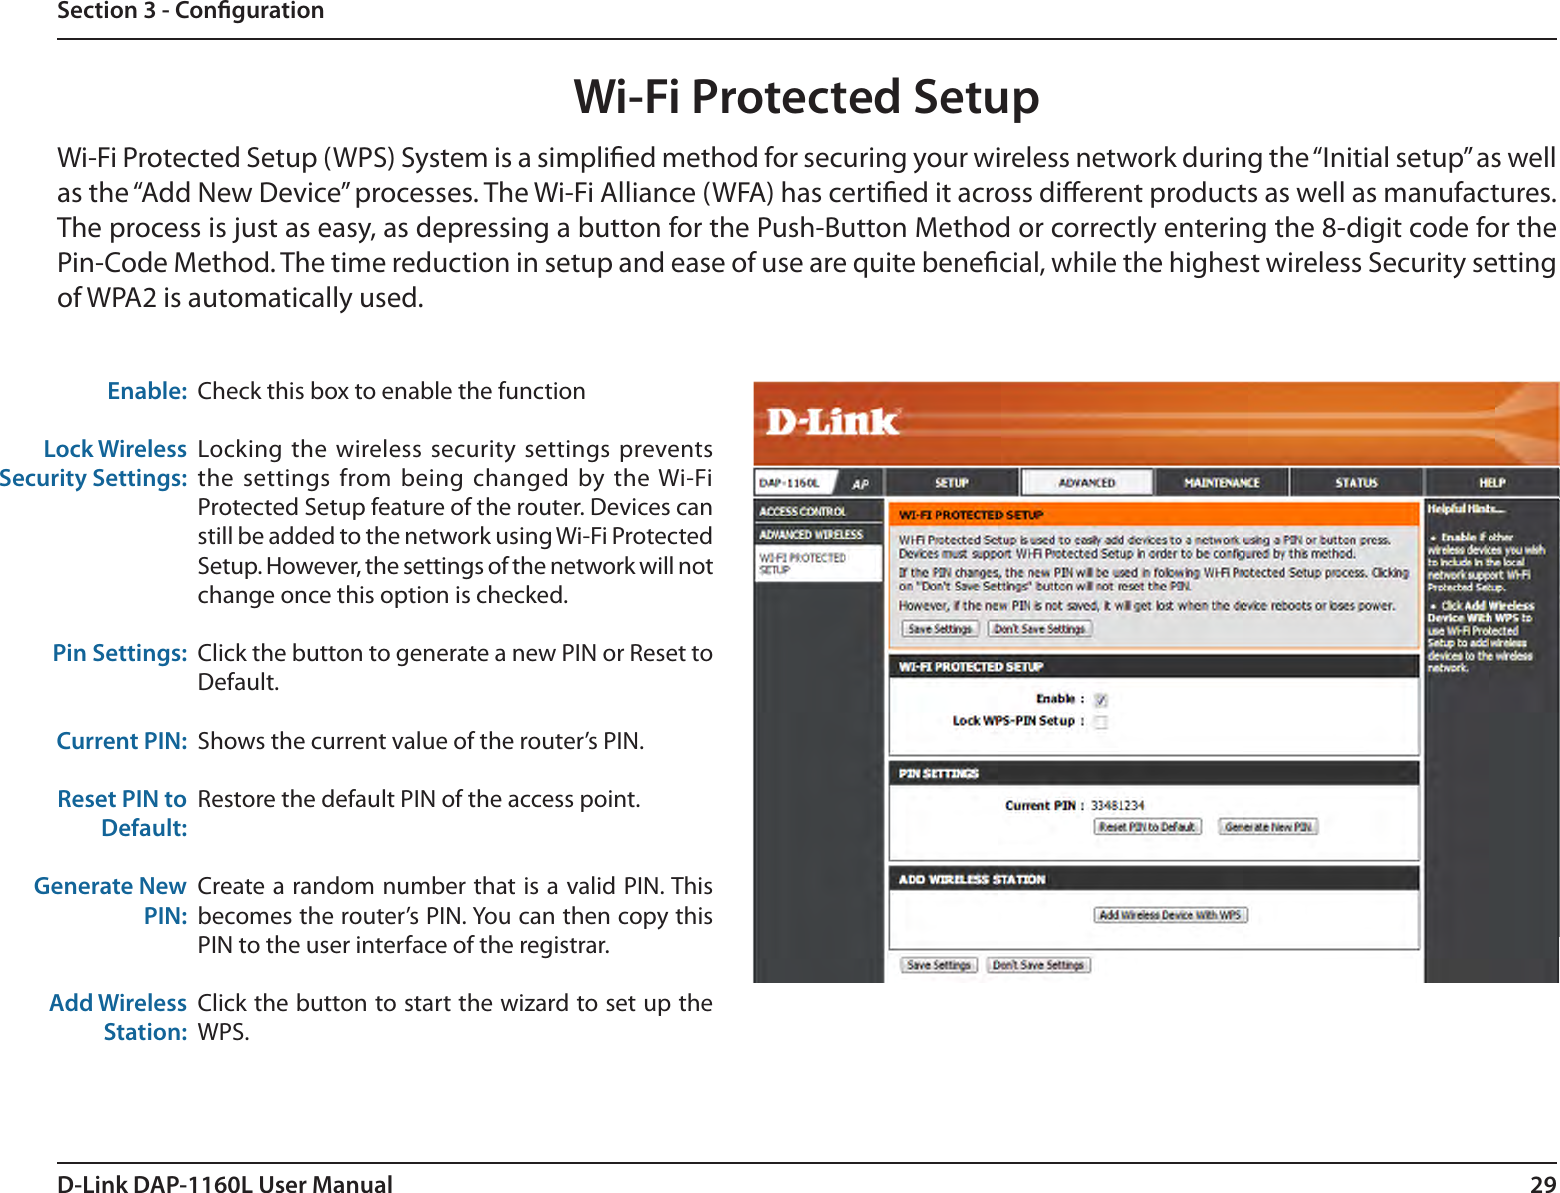 29D-Link DAP-1160L User ManualSection 3 - CongurationWi-Fi Protected SetupCheck this box to enable the functionLocking the wireless security settings prevents the settings from being changed by the Wi-Fi Protected Setup feature of the router. Devices can still be added to the network using Wi-Fi Protected Setup. However, the settings of the network will not change once this option is checked.Click the button to generate a new PIN or Reset to Default. Shows the current value of the router’s PIN.Restore the default PIN of the access point.Create a random number that is a valid PIN. This becomes the router’s PIN. You can then copy this PIN to the user interface of the registrar.Click the button to start the wizard to set up the WPS. Enable:Lock Wireless Security Settings:Pin Settings:Current PIN:Reset PIN to Default:Generate New PIN:Add Wireless Station:Wi-Fi Protected Setup (WPS) System is a simplied method for securing your wireless network during the “Initial setup” as well as the “Add New Device” processes. The Wi-Fi Alliance (WFA) has certied it across dierent products as well as manufactures. The process is just as easy, as depressing a button for the Push-Button Method or correctly entering the 8-digit code for the Pin-Code Method. The time reduction in setup and ease of use are quite benecial, while the highest wireless Security setting of WPA2 is automatically used.